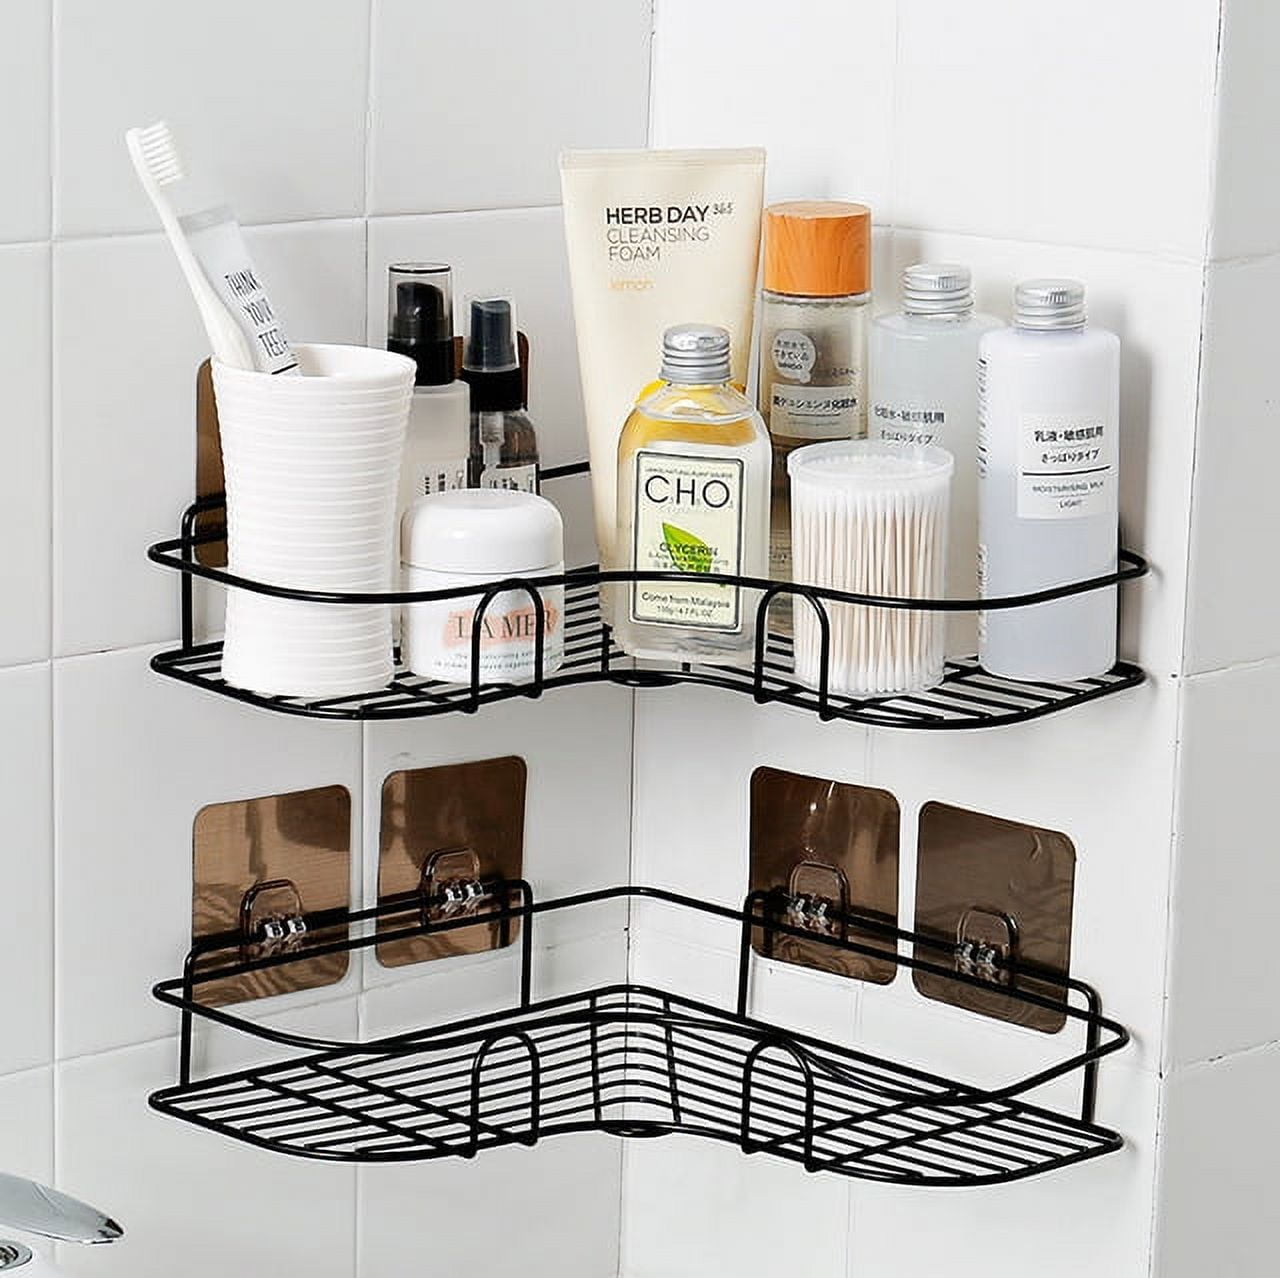 Adhesive Shower Caddy Bathroom Shelf Organizer Shower Shelves Stainless  Steel Self in Black, 2 Pcs 755126437 - The Home Depot